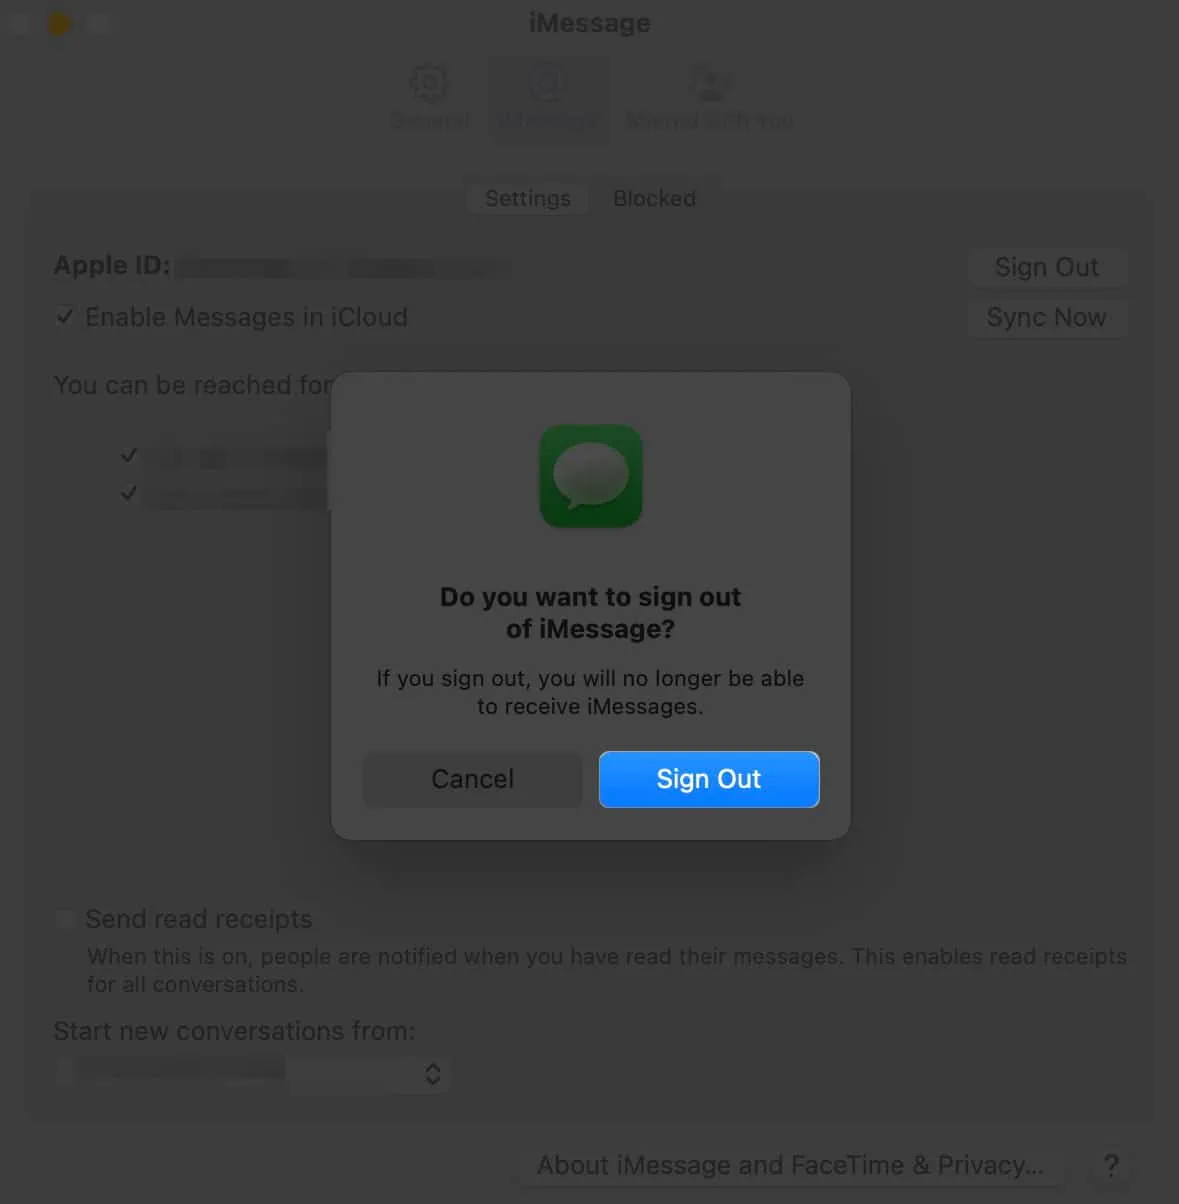 Press Sign out next to your Apple ID.